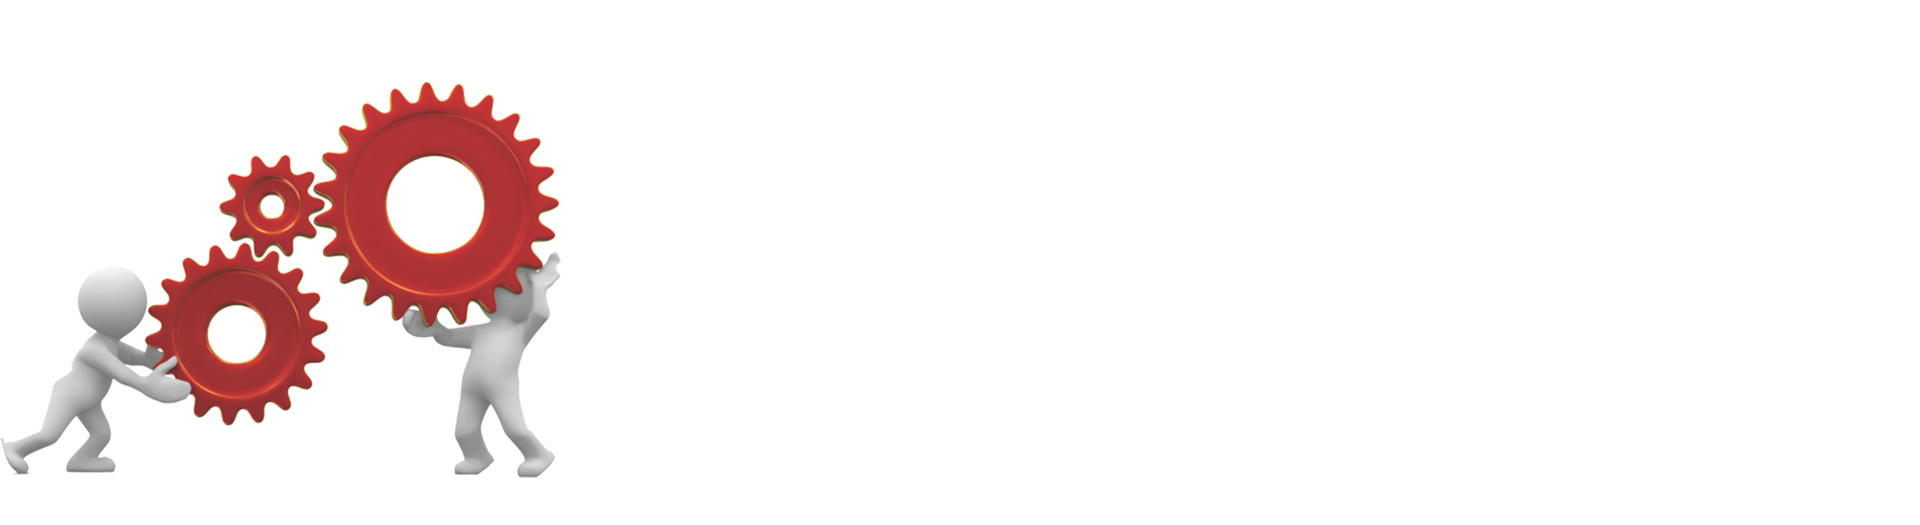 Polymer Waste Importer and Recycler Association